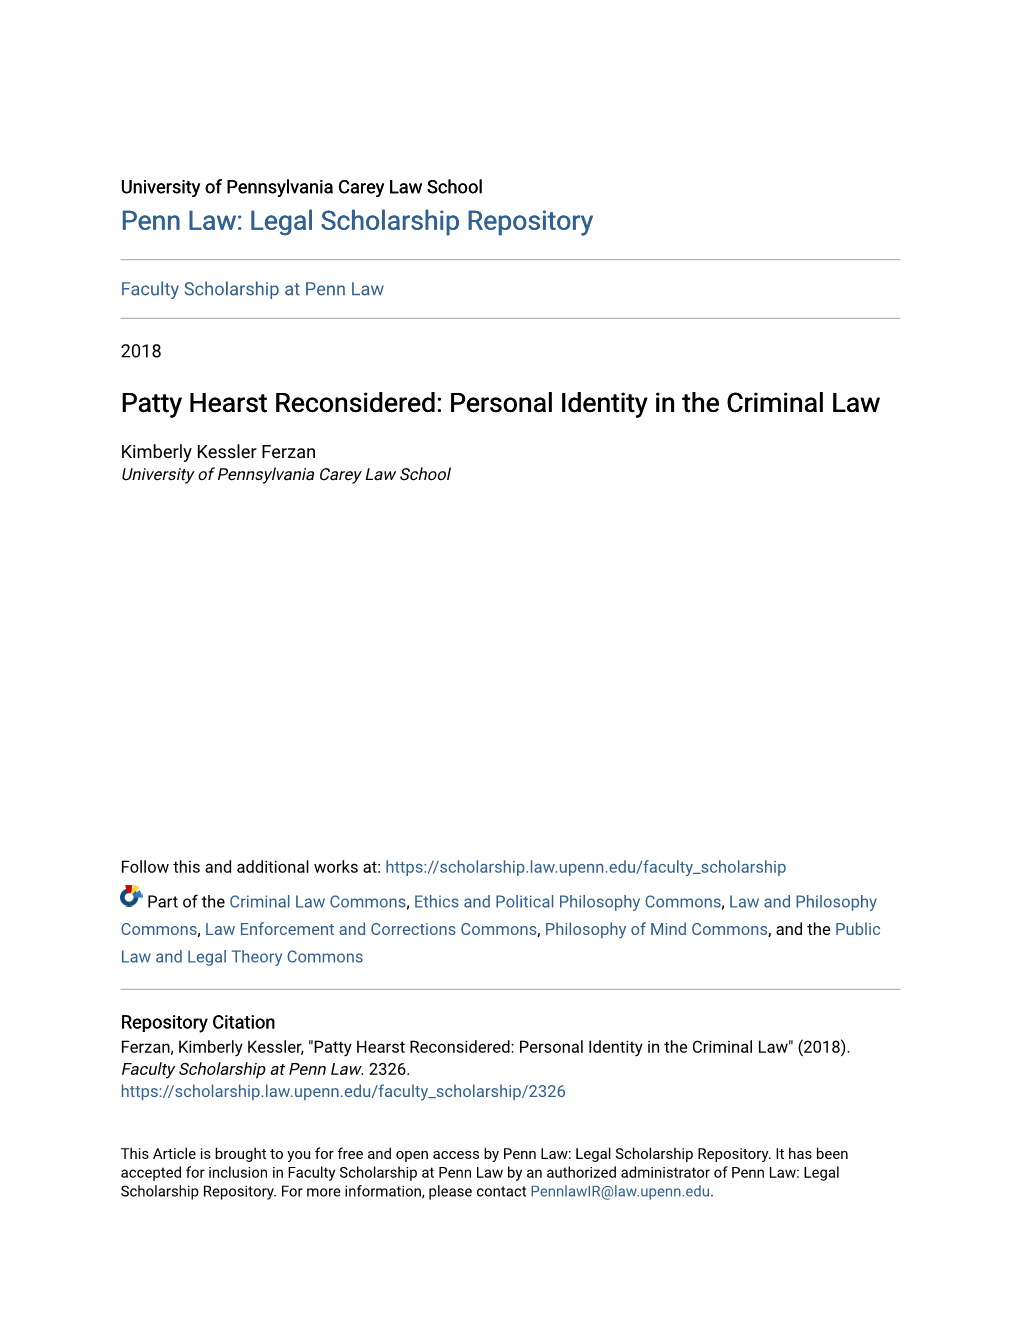 Personal Identity in the Criminal Law